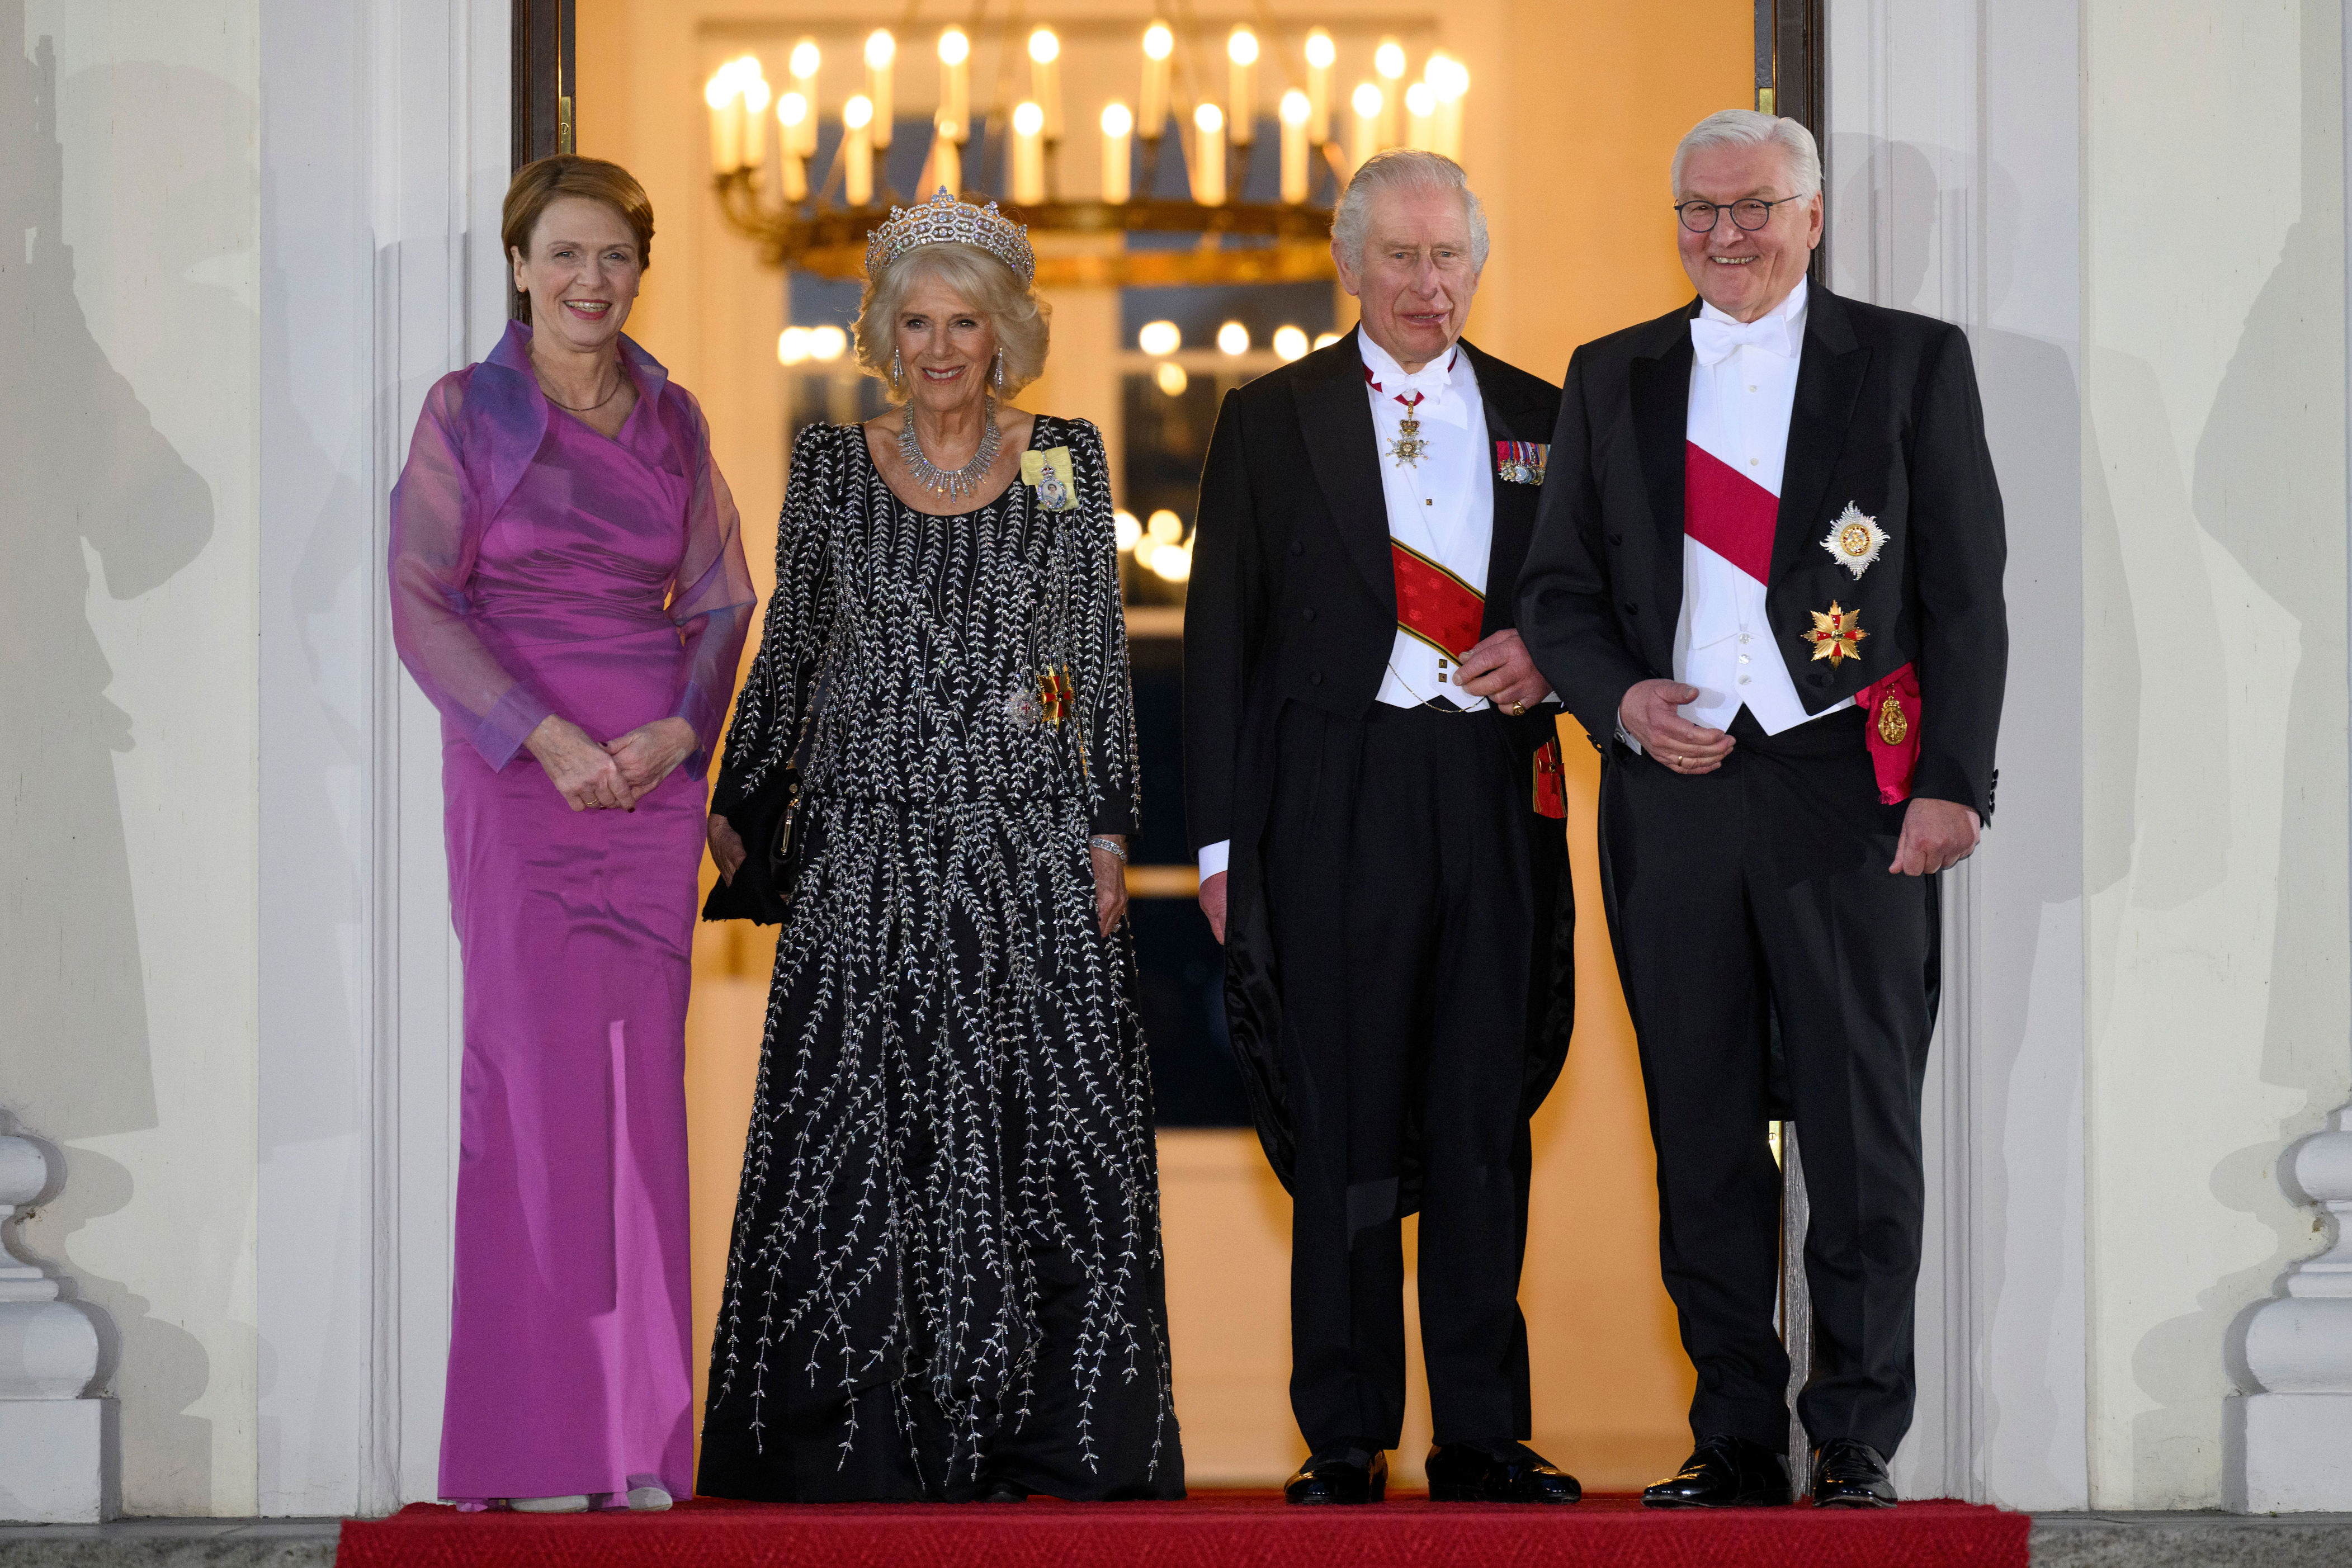 <p>King Charles III and Queen Consort Camilla posed with Germany's President Frank-Walter Steinmeier and first lady Elke Budenbender outside a State Banquet at Schloss Bellevue in Berlin, Germany, hosted by the president on March 29, 2023, on the first day of <a href="https://www.wonderwall.com/celebrity/king-charles-iii-and-queen-consort-camilla-the-best-photos-from-their-state-visit-to-germany-720122.gallery">the British royals' state visit to Germany</a>.</p>